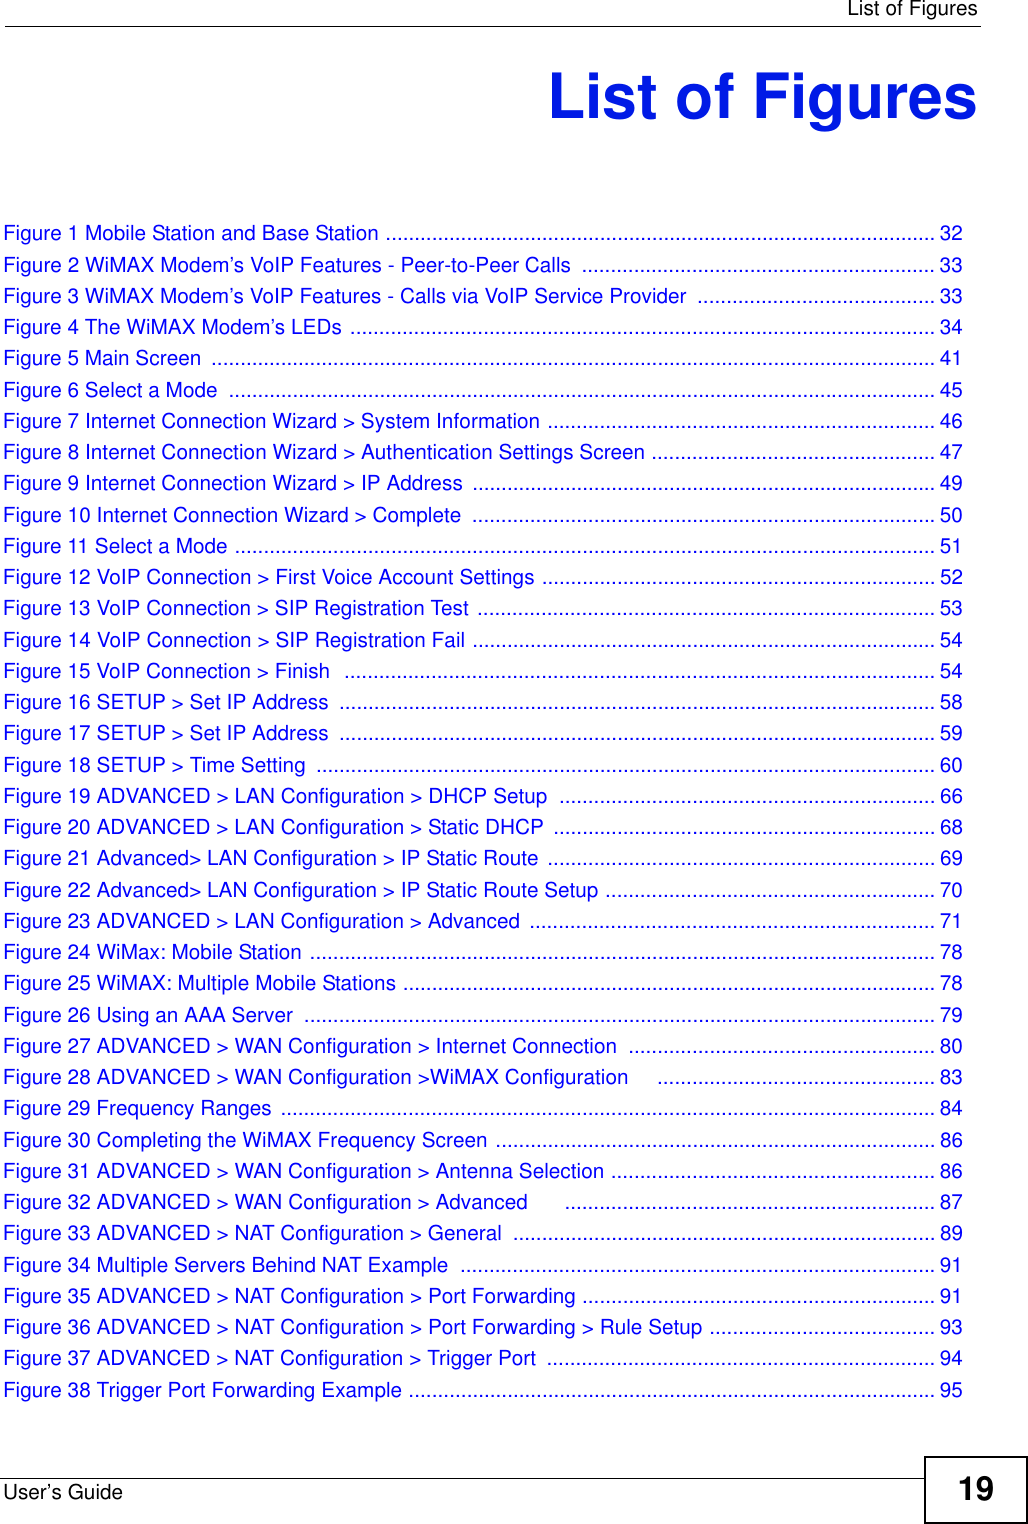  List of FiguresUser’s Guide 19List of FiguresFigure 1 Mobile Station and Base Station ............................................................................................... 32Figure 2 WiMAX Modem’s VoIP Features - Peer-to-Peer Calls  ............................................................. 33Figure 3 WiMAX Modem’s VoIP Features - Calls via VoIP Service Provider  ......................................... 33Figure 4 The WiMAX Modem’s LEDs ..................................................................................................... 34Figure 5 Main Screen  ............................................................................................................................. 41Figure 6 Select a Mode  .......................................................................................................................... 45Figure 7 Internet Connection Wizard &gt; System Information ................................................................... 46Figure 8 Internet Connection Wizard &gt; Authentication Settings Screen ................................................. 47Figure 9 Internet Connection Wizard &gt; IP Address ................................................................................ 49Figure 10 Internet Connection Wizard &gt; Complete  ................................................................................50Figure 11 Select a Mode ......................................................................................................................... 51Figure 12 VoIP Connection &gt; First Voice Account Settings .................................................................... 52Figure 13 VoIP Connection &gt; SIP Registration Test ............................................................................... 53Figure 14 VoIP Connection &gt; SIP Registration Fail ................................................................................ 54Figure 15 VoIP Connection &gt; Finish  ...................................................................................................... 54Figure 16 SETUP &gt; Set IP Address ....................................................................................................... 58Figure 17 SETUP &gt; Set IP Address ....................................................................................................... 59Figure 18 SETUP &gt; Time Setting ........................................................................................................... 60Figure 19 ADVANCED &gt; LAN Configuration &gt; DHCP Setup ................................................................. 66Figure 20 ADVANCED &gt; LAN Configuration &gt; Static DHCP .................................................................. 68Figure 21 Advanced&gt; LAN Configuration &gt; IP Static Route  ................................................................... 69Figure 22 Advanced&gt; LAN Configuration &gt; IP Static Route Setup ......................................................... 70Figure 23 ADVANCED &gt; LAN Configuration &gt; Advanced  ...................................................................... 71Figure 24 WiMax: Mobile Station ............................................................................................................ 78Figure 25 WiMAX: Multiple Mobile Stations ............................................................................................ 78Figure 26 Using an AAA Server  ............................................................................................................. 79Figure 27 ADVANCED &gt; WAN Configuration &gt; Internet Connection  ..................................................... 80Figure 28 ADVANCED &gt; WAN Configuration &gt;WiMAX Configuration     ................................................ 83Figure 29 Frequency Ranges  ................................................................................................................. 84Figure 30 Completing the WiMAX Frequency Screen ............................................................................ 86Figure 31 ADVANCED &gt; WAN Configuration &gt; Antenna Selection ........................................................ 86Figure 32 ADVANCED &gt; WAN Configuration &gt; Advanced      ................................................................ 87Figure 33 ADVANCED &gt; NAT Configuration &gt; General ......................................................................... 89Figure 34 Multiple Servers Behind NAT Example  ..................................................................................91Figure 35 ADVANCED &gt; NAT Configuration &gt; Port Forwarding ............................................................. 91Figure 36 ADVANCED &gt; NAT Configuration &gt; Port Forwarding &gt; Rule Setup ....................................... 93Figure 37 ADVANCED &gt; NAT Configuration &gt; Trigger Port  ................................................................... 94Figure 38 Trigger Port Forwarding Example ........................................................................................... 95